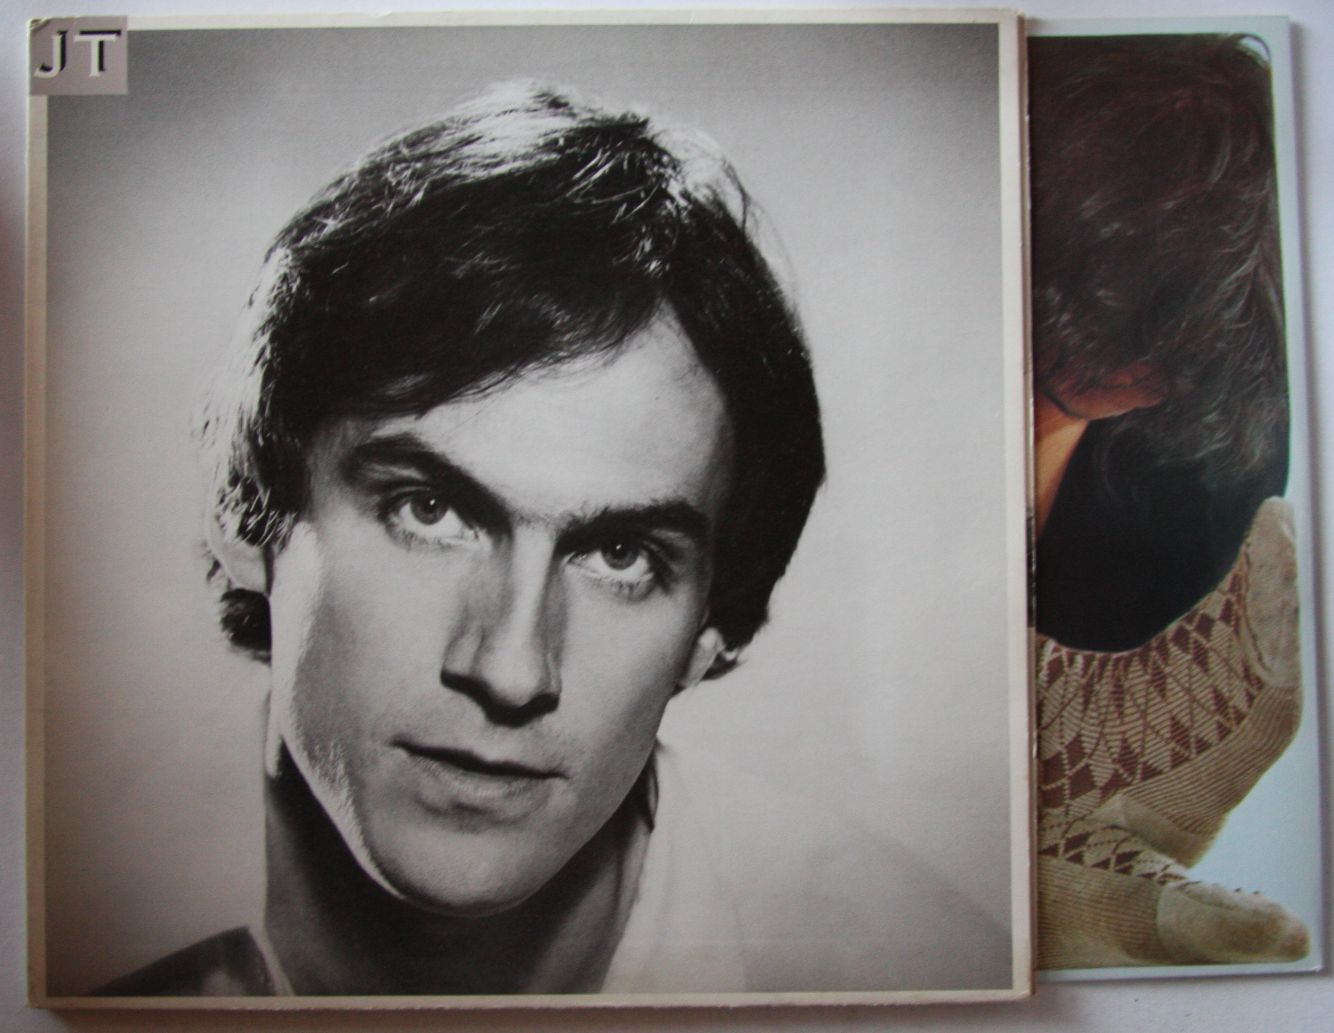 James Taylor Jt Records, LPs, Vinyl and CDs - MusicStack